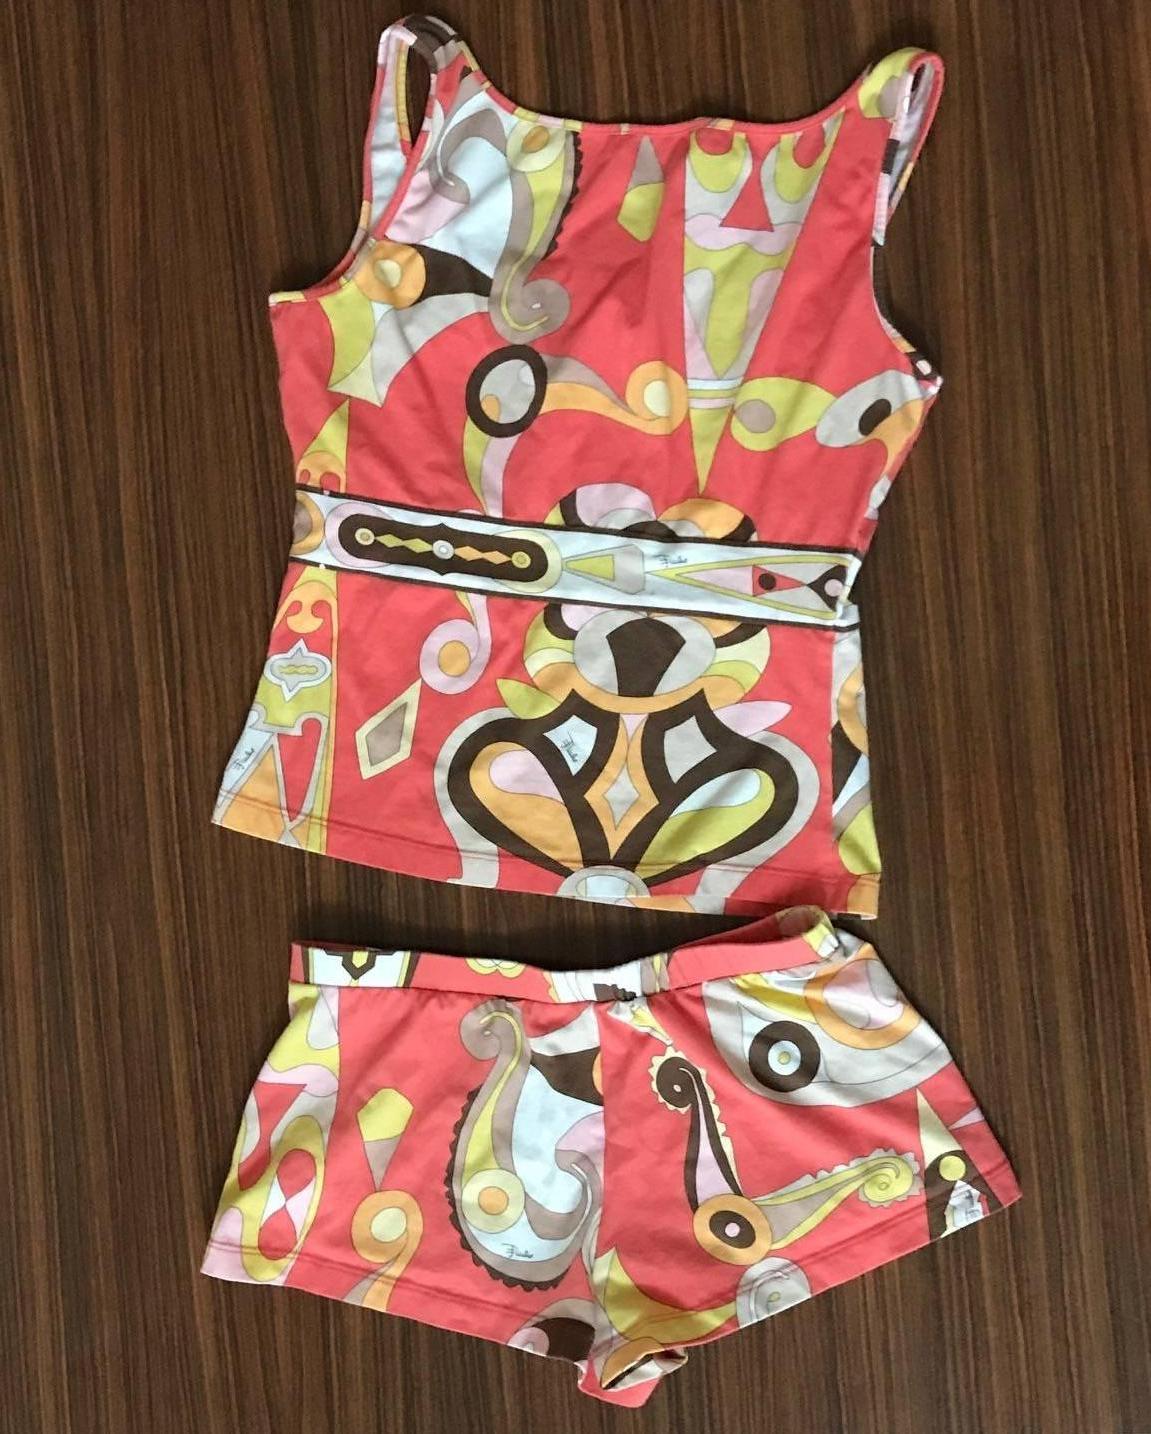 Emilio Pucci light orange stretch cotton lounge set with boy shorts and a tank top in signature Pucci print. Signed 'Emilio' throughout.

90% cotton, 10% spandex.

Made in Italy.

Size IT 38, fits like 2/4. See measurements. Stretchy. Measurements